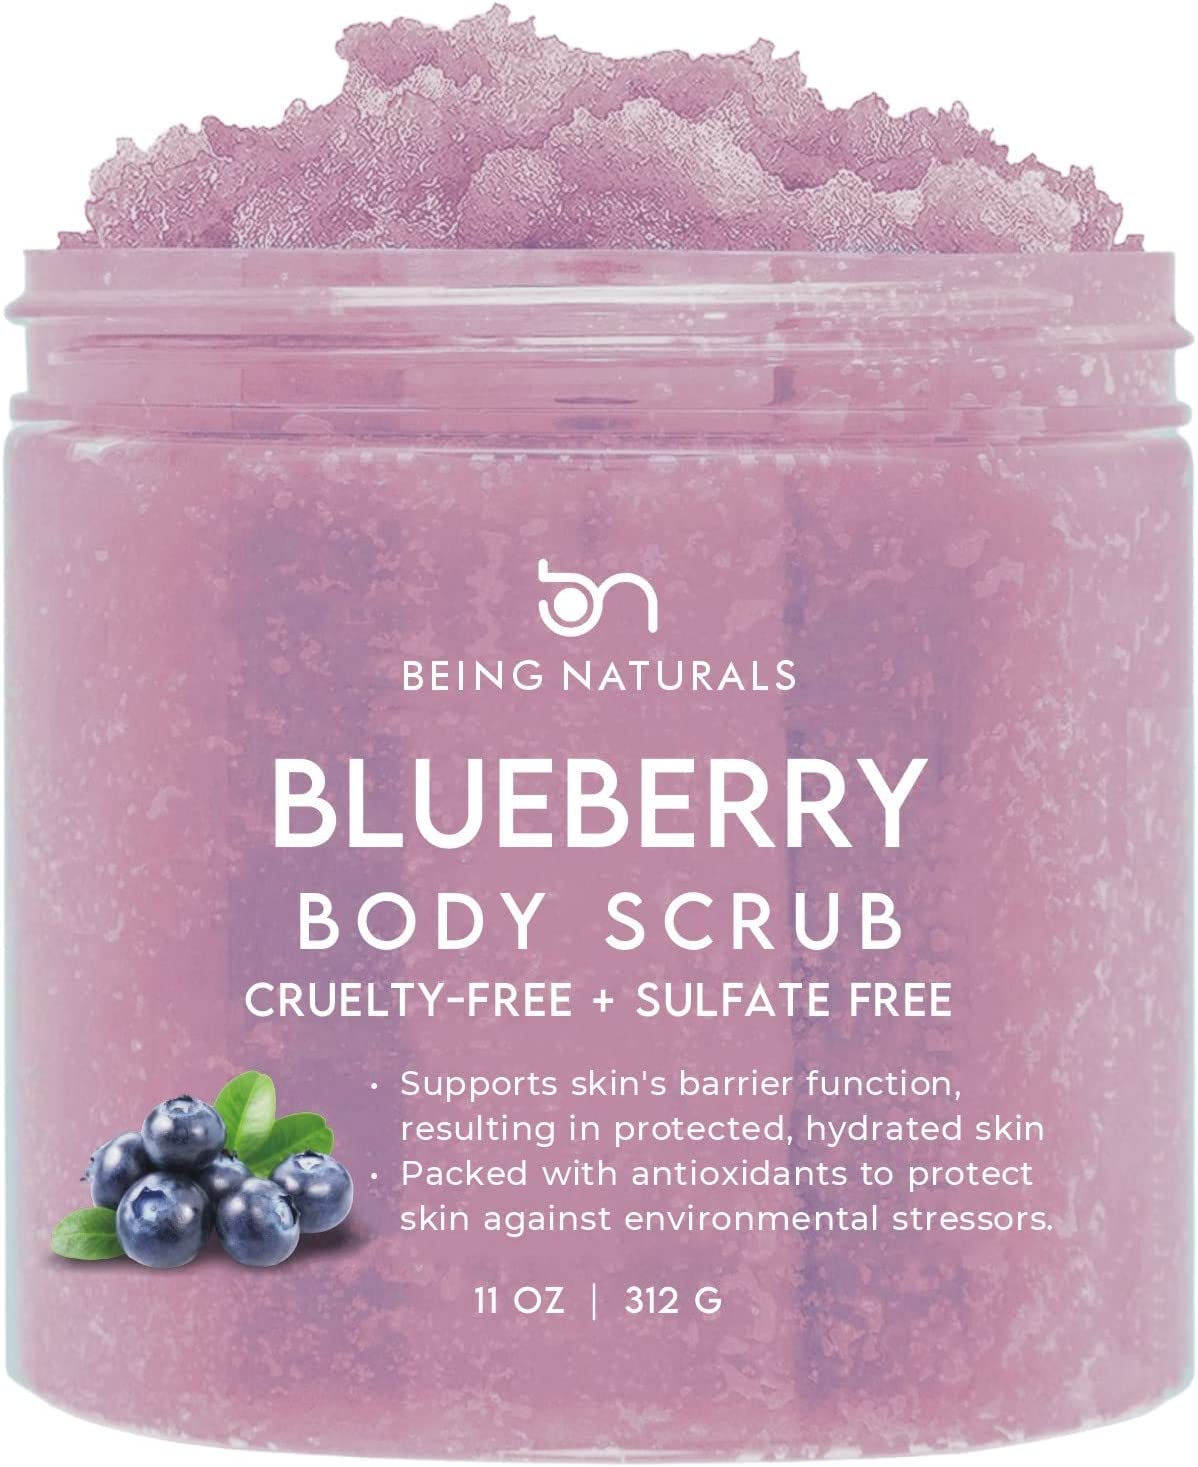 Blueberry All Natural Body Scrub – Natural Exfoliating Salt Scrub & Body and Face Souffle helps with Moisturizing Skin, Acne, Cellulite, Dead Skin Scars, Wrinkles (11 oz)